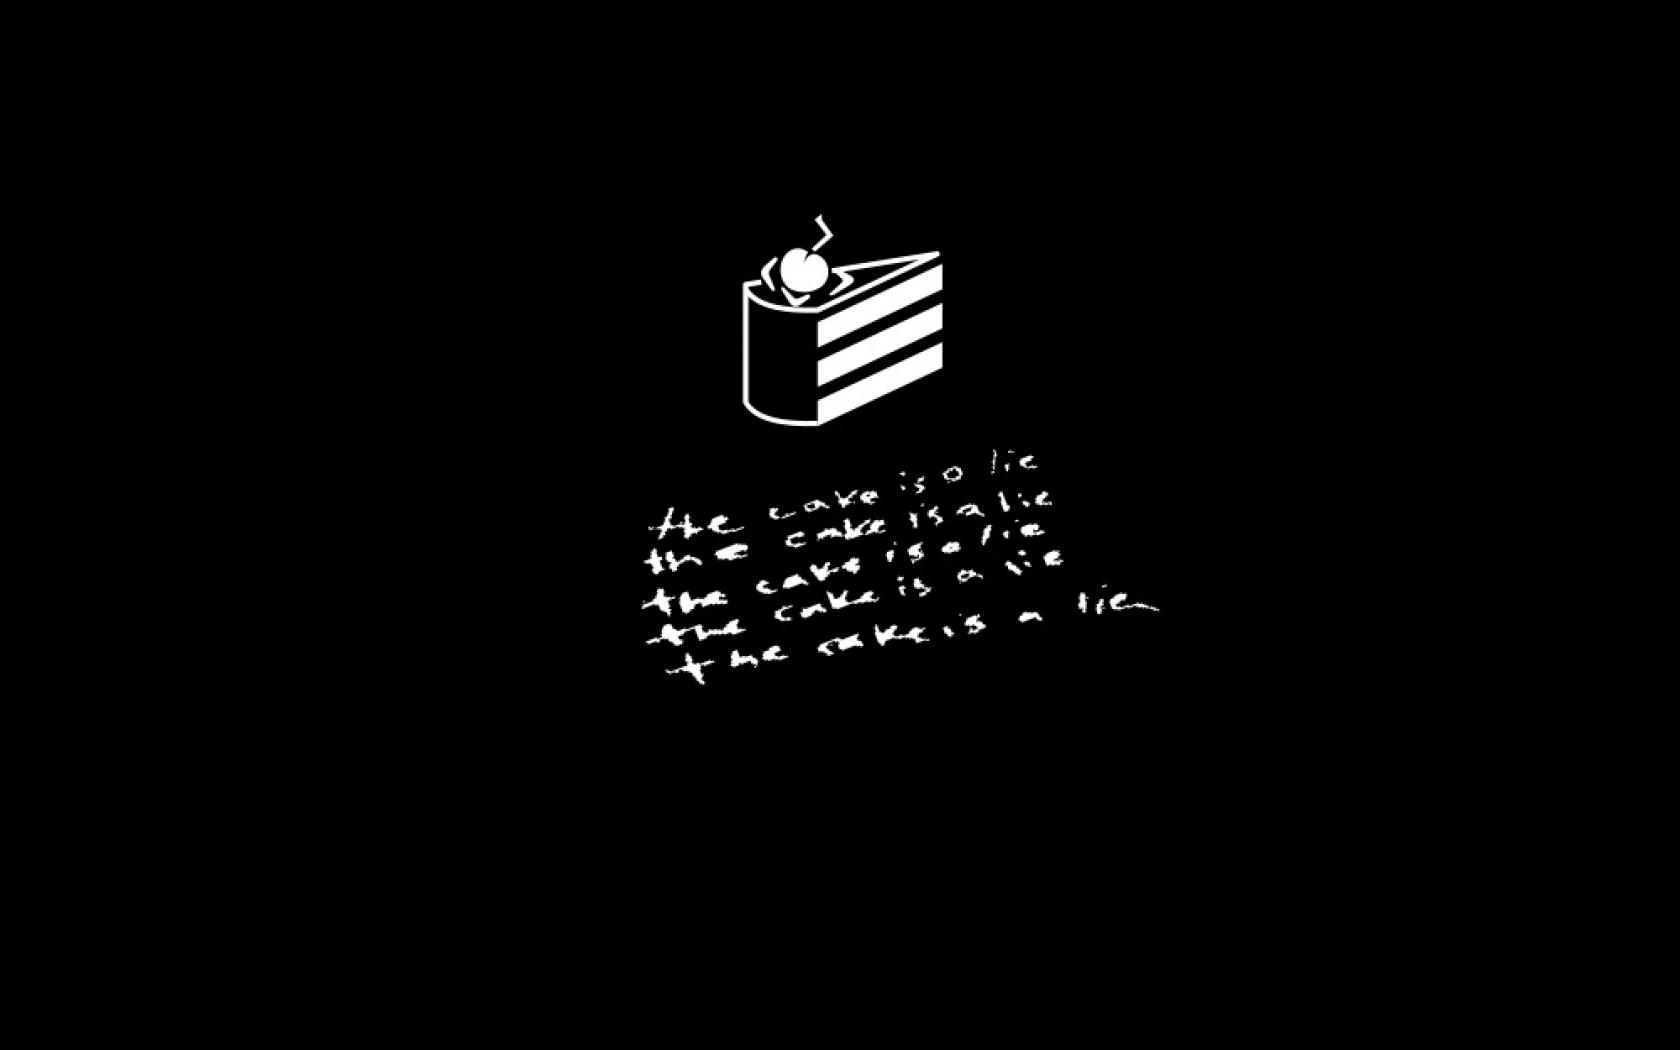 Portal black and white minimalistic text the cake is a lie ...